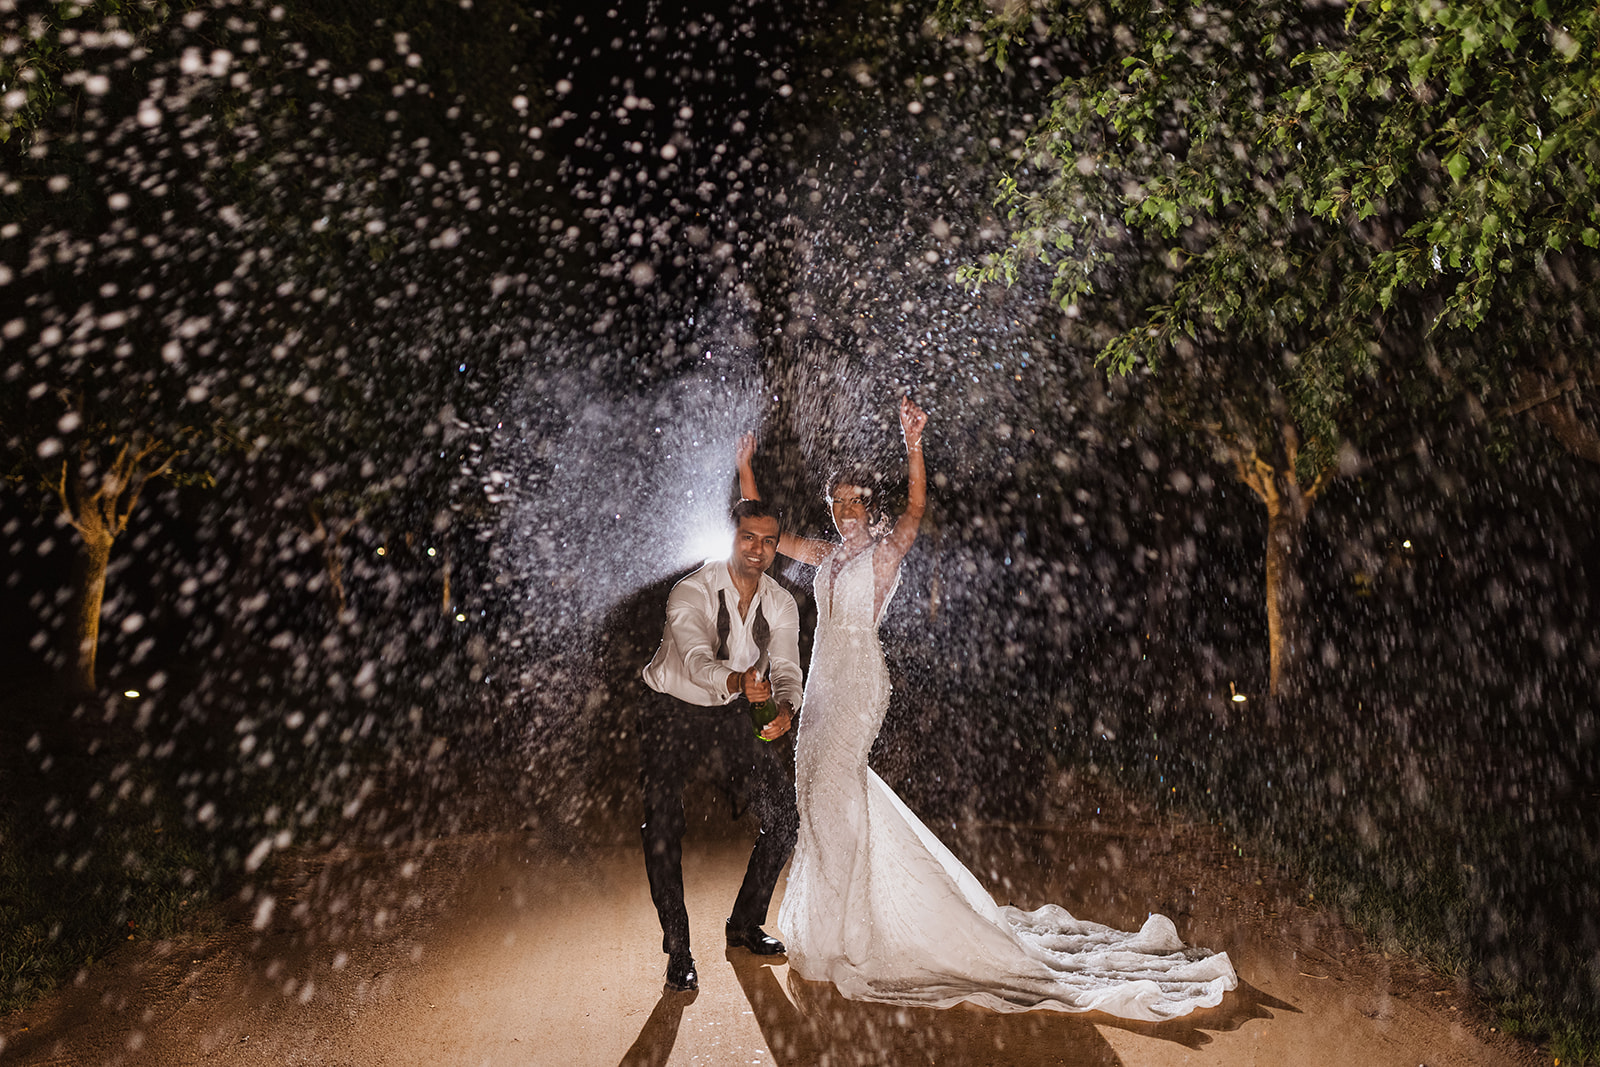 Nigh time champagne shower at the Wedding in Mona Farm Braidwood, New South Wales